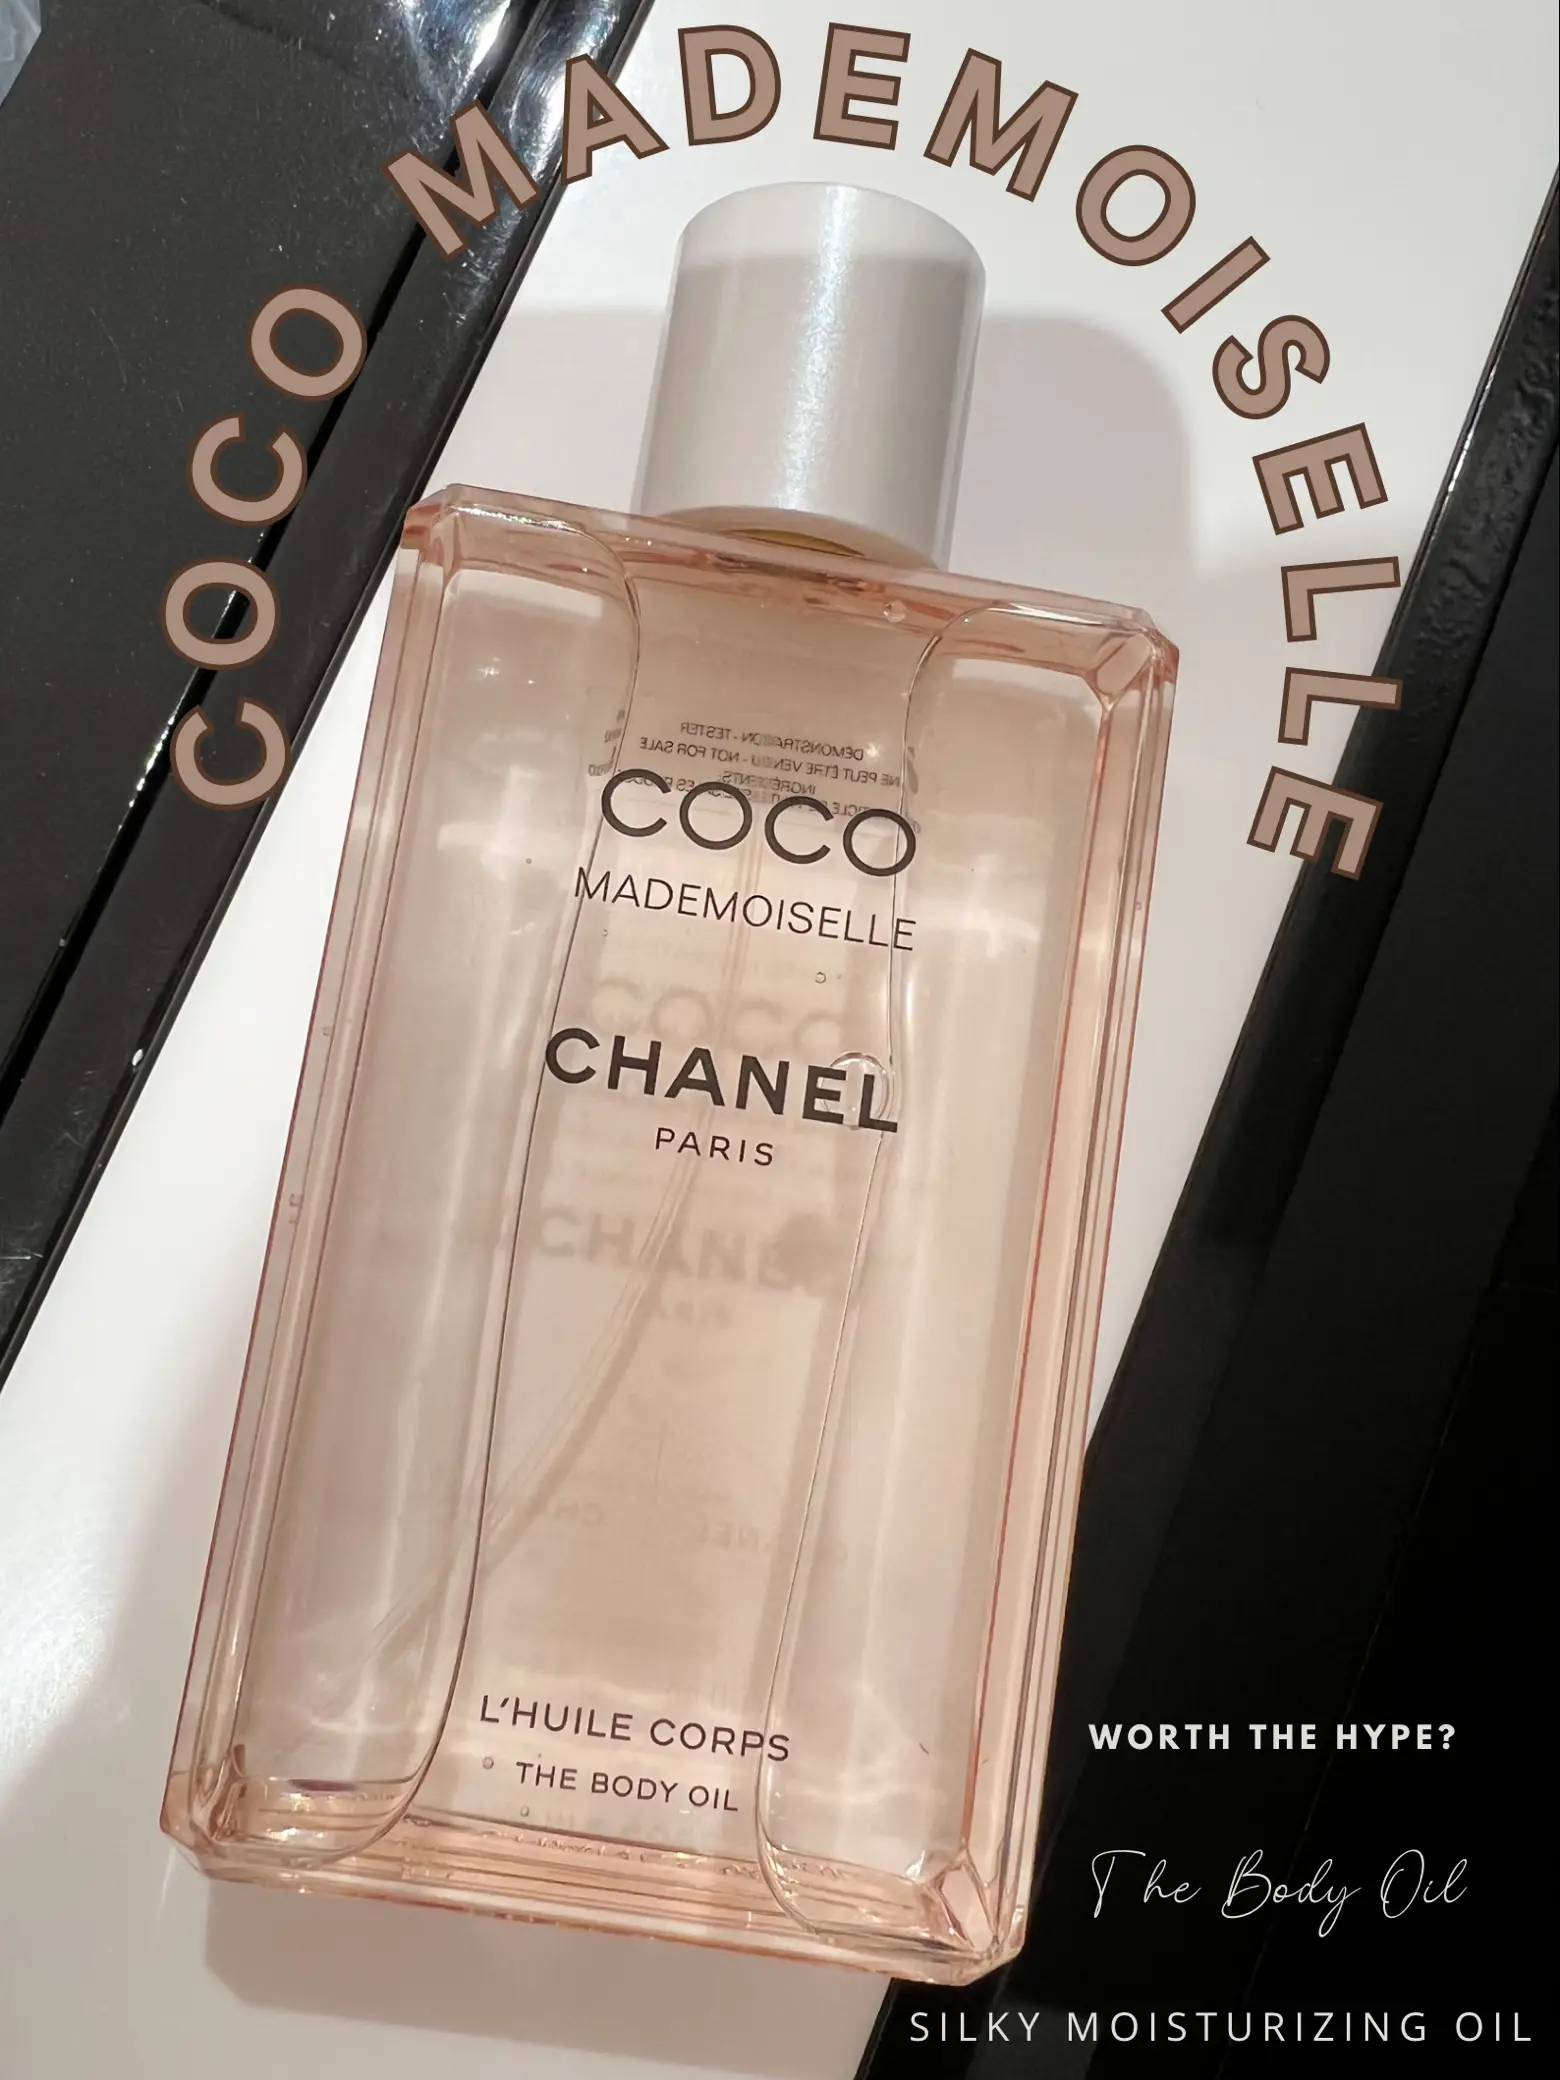 Is Coco Mademoiselle body oil worth the hype? ✨